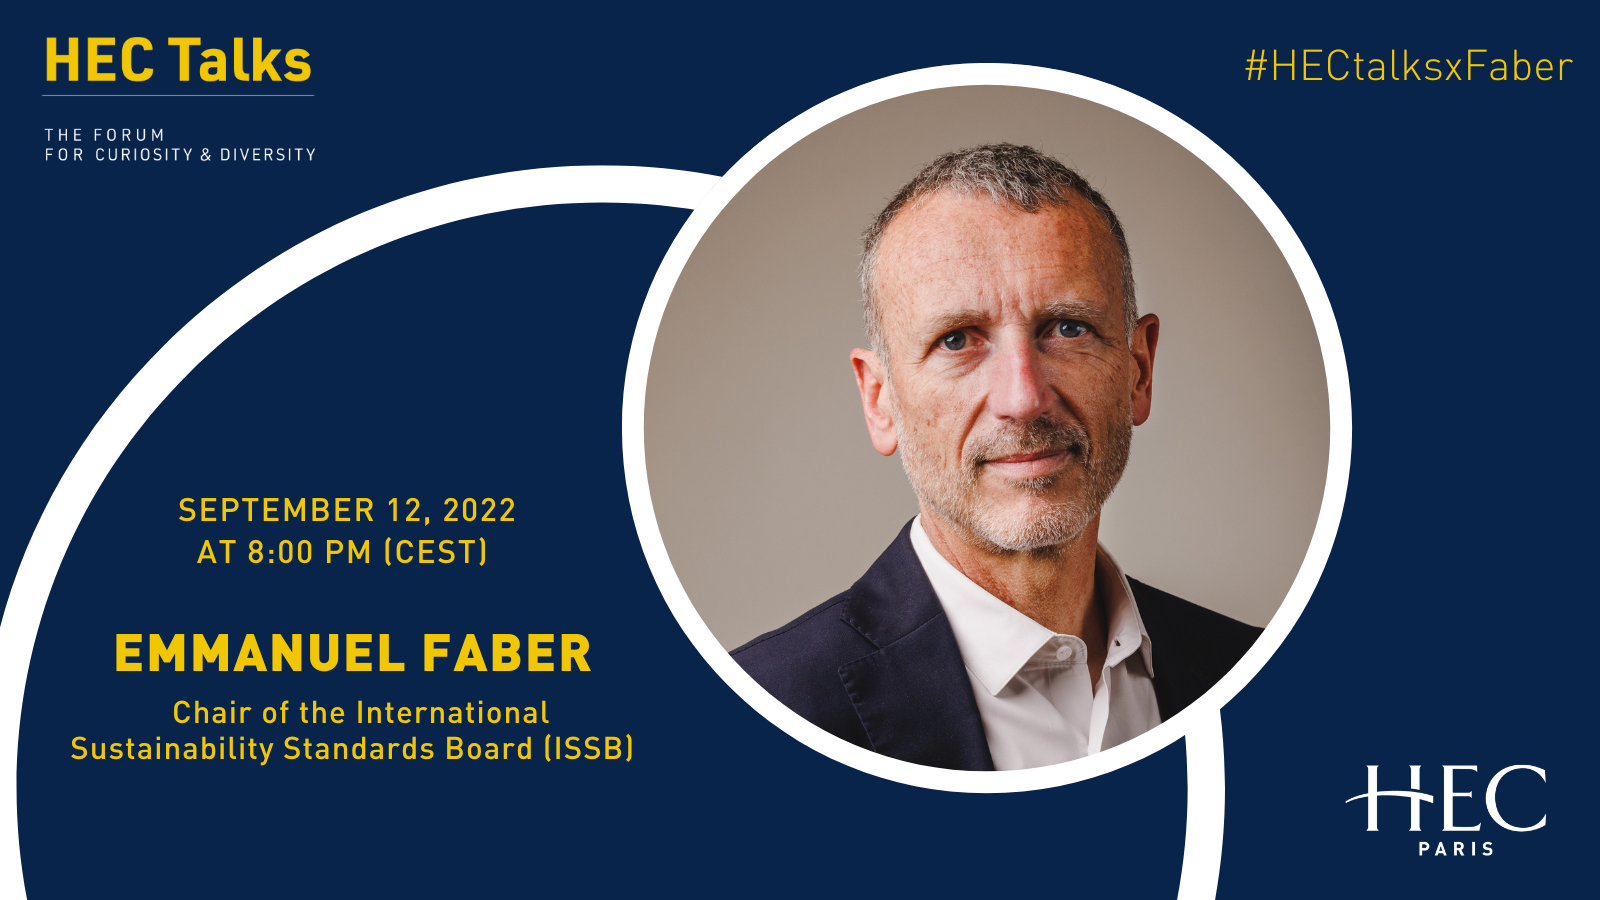 HEC TALKS: With Emmanuel Faber, Chair of ISSB